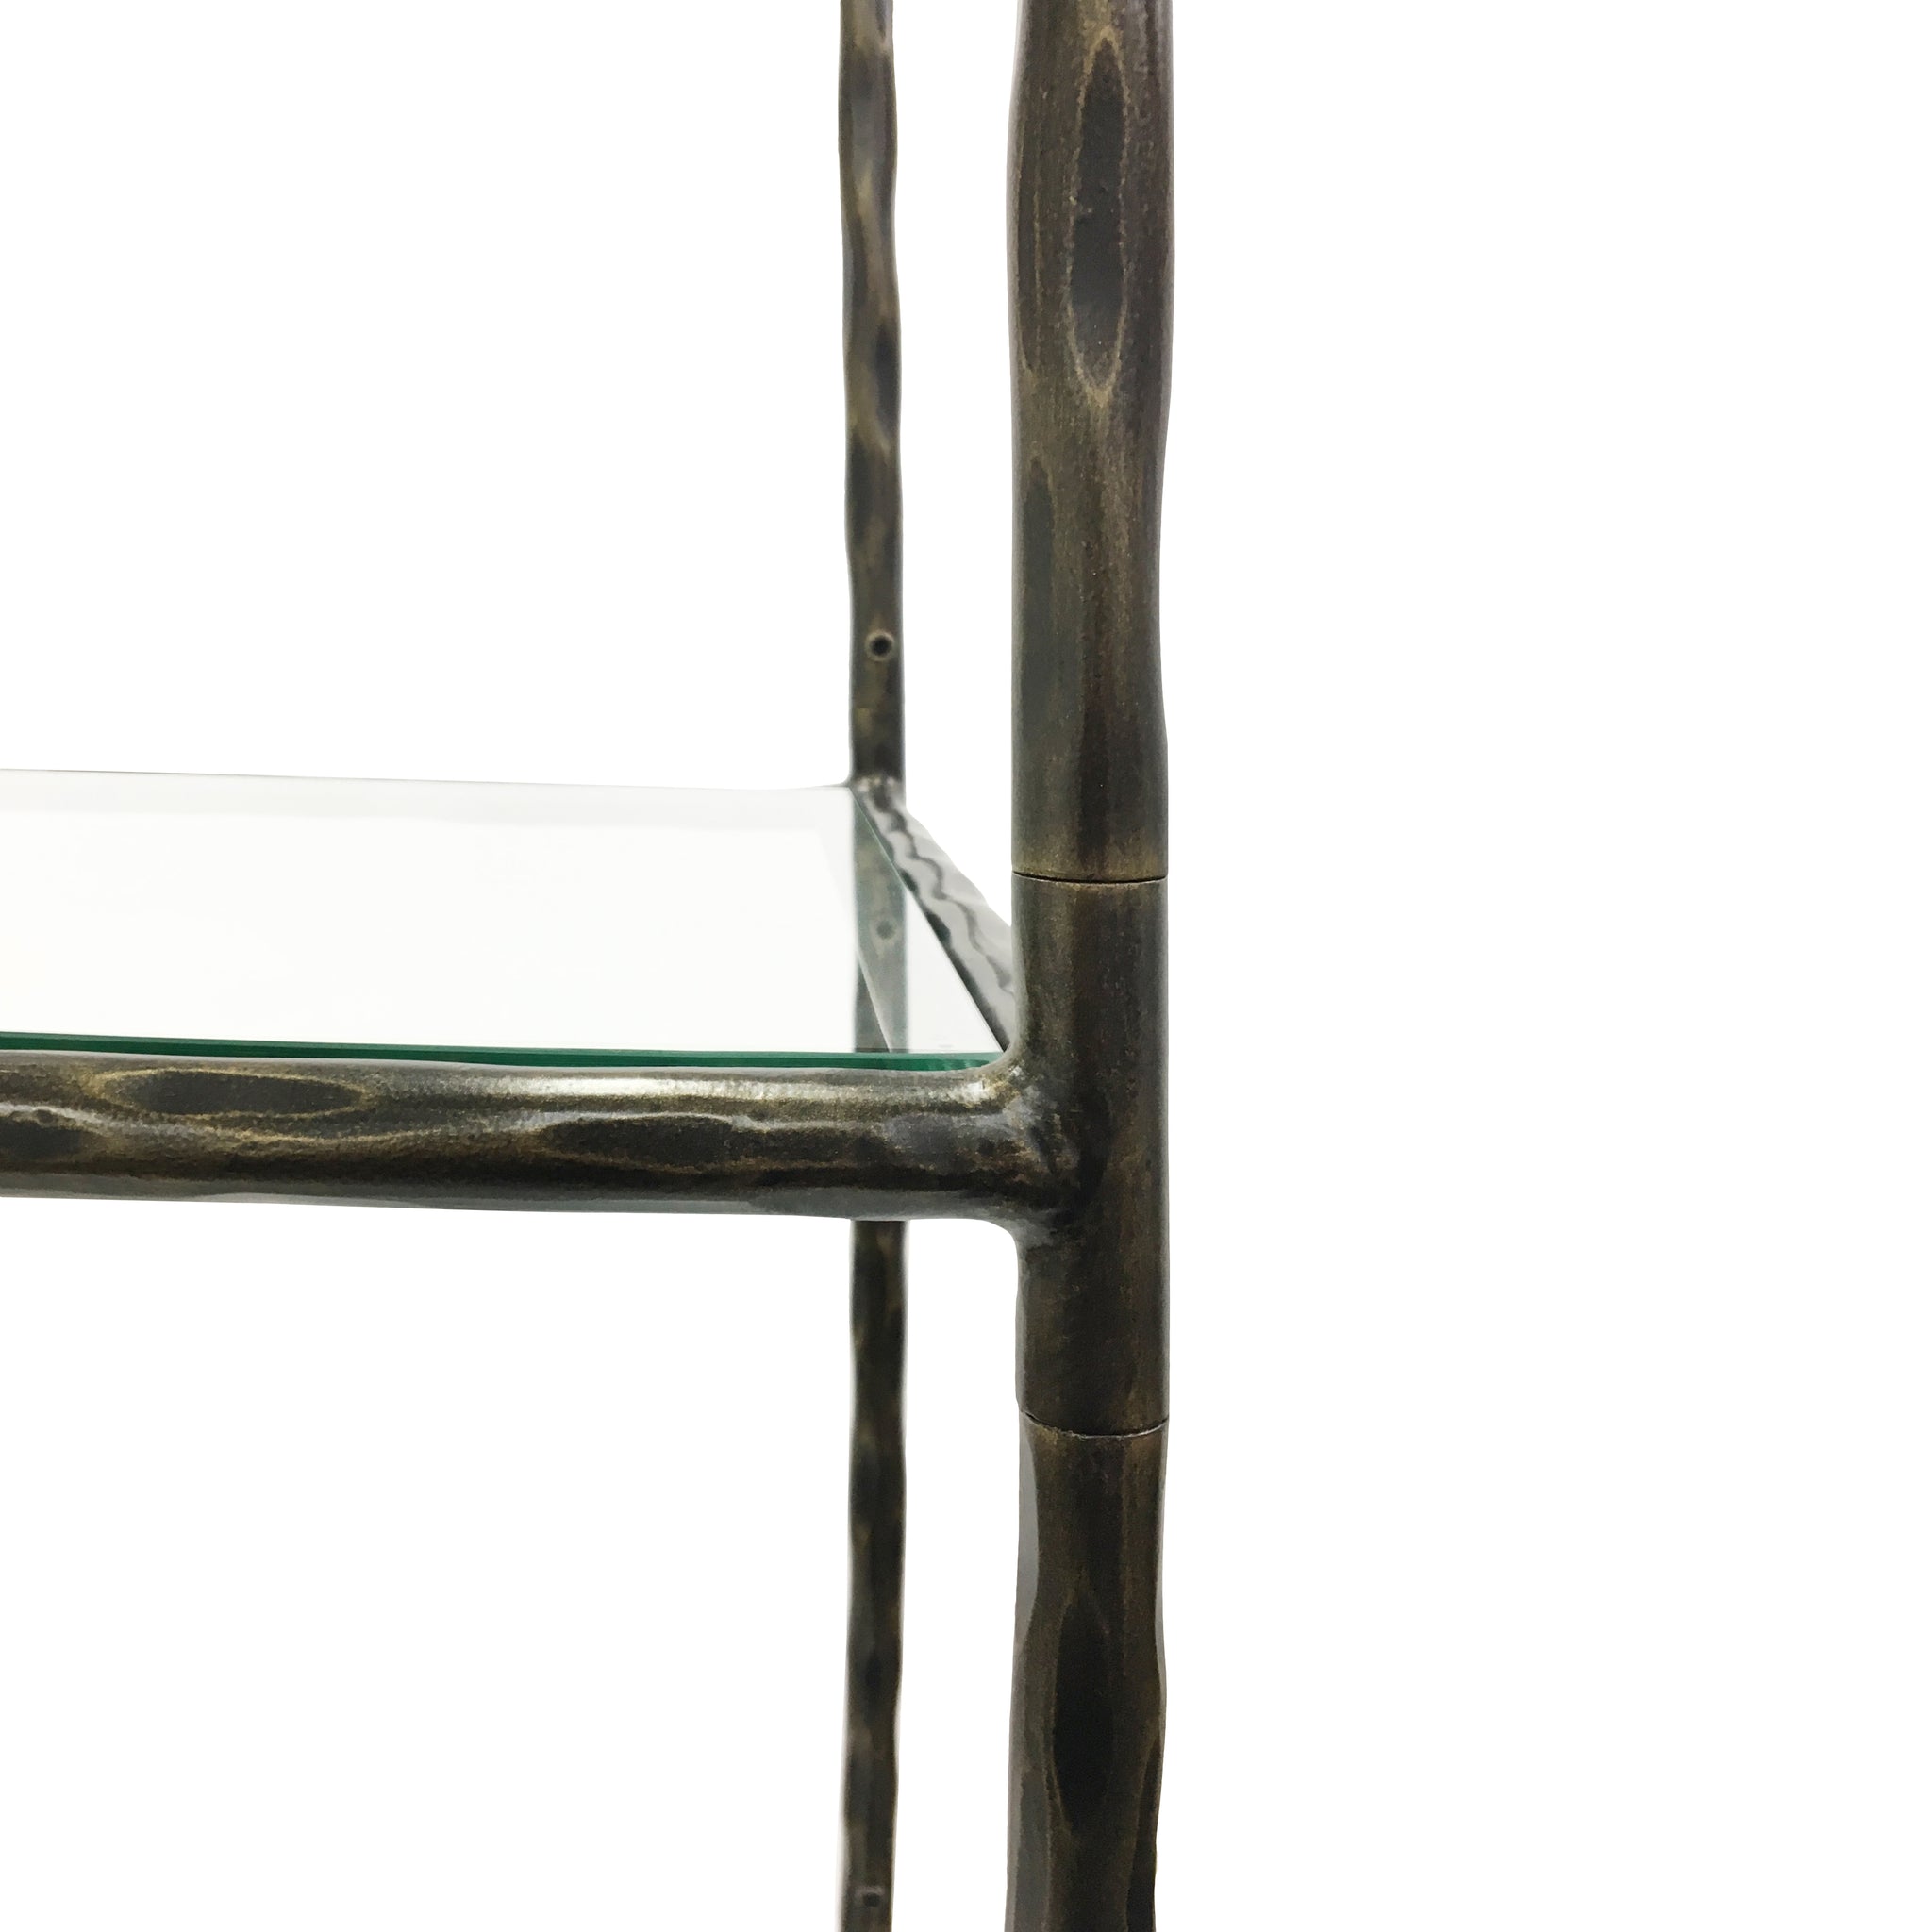 Dalton Hand Forged Shelving Unit Table Dark Bronze with Glass Shelves